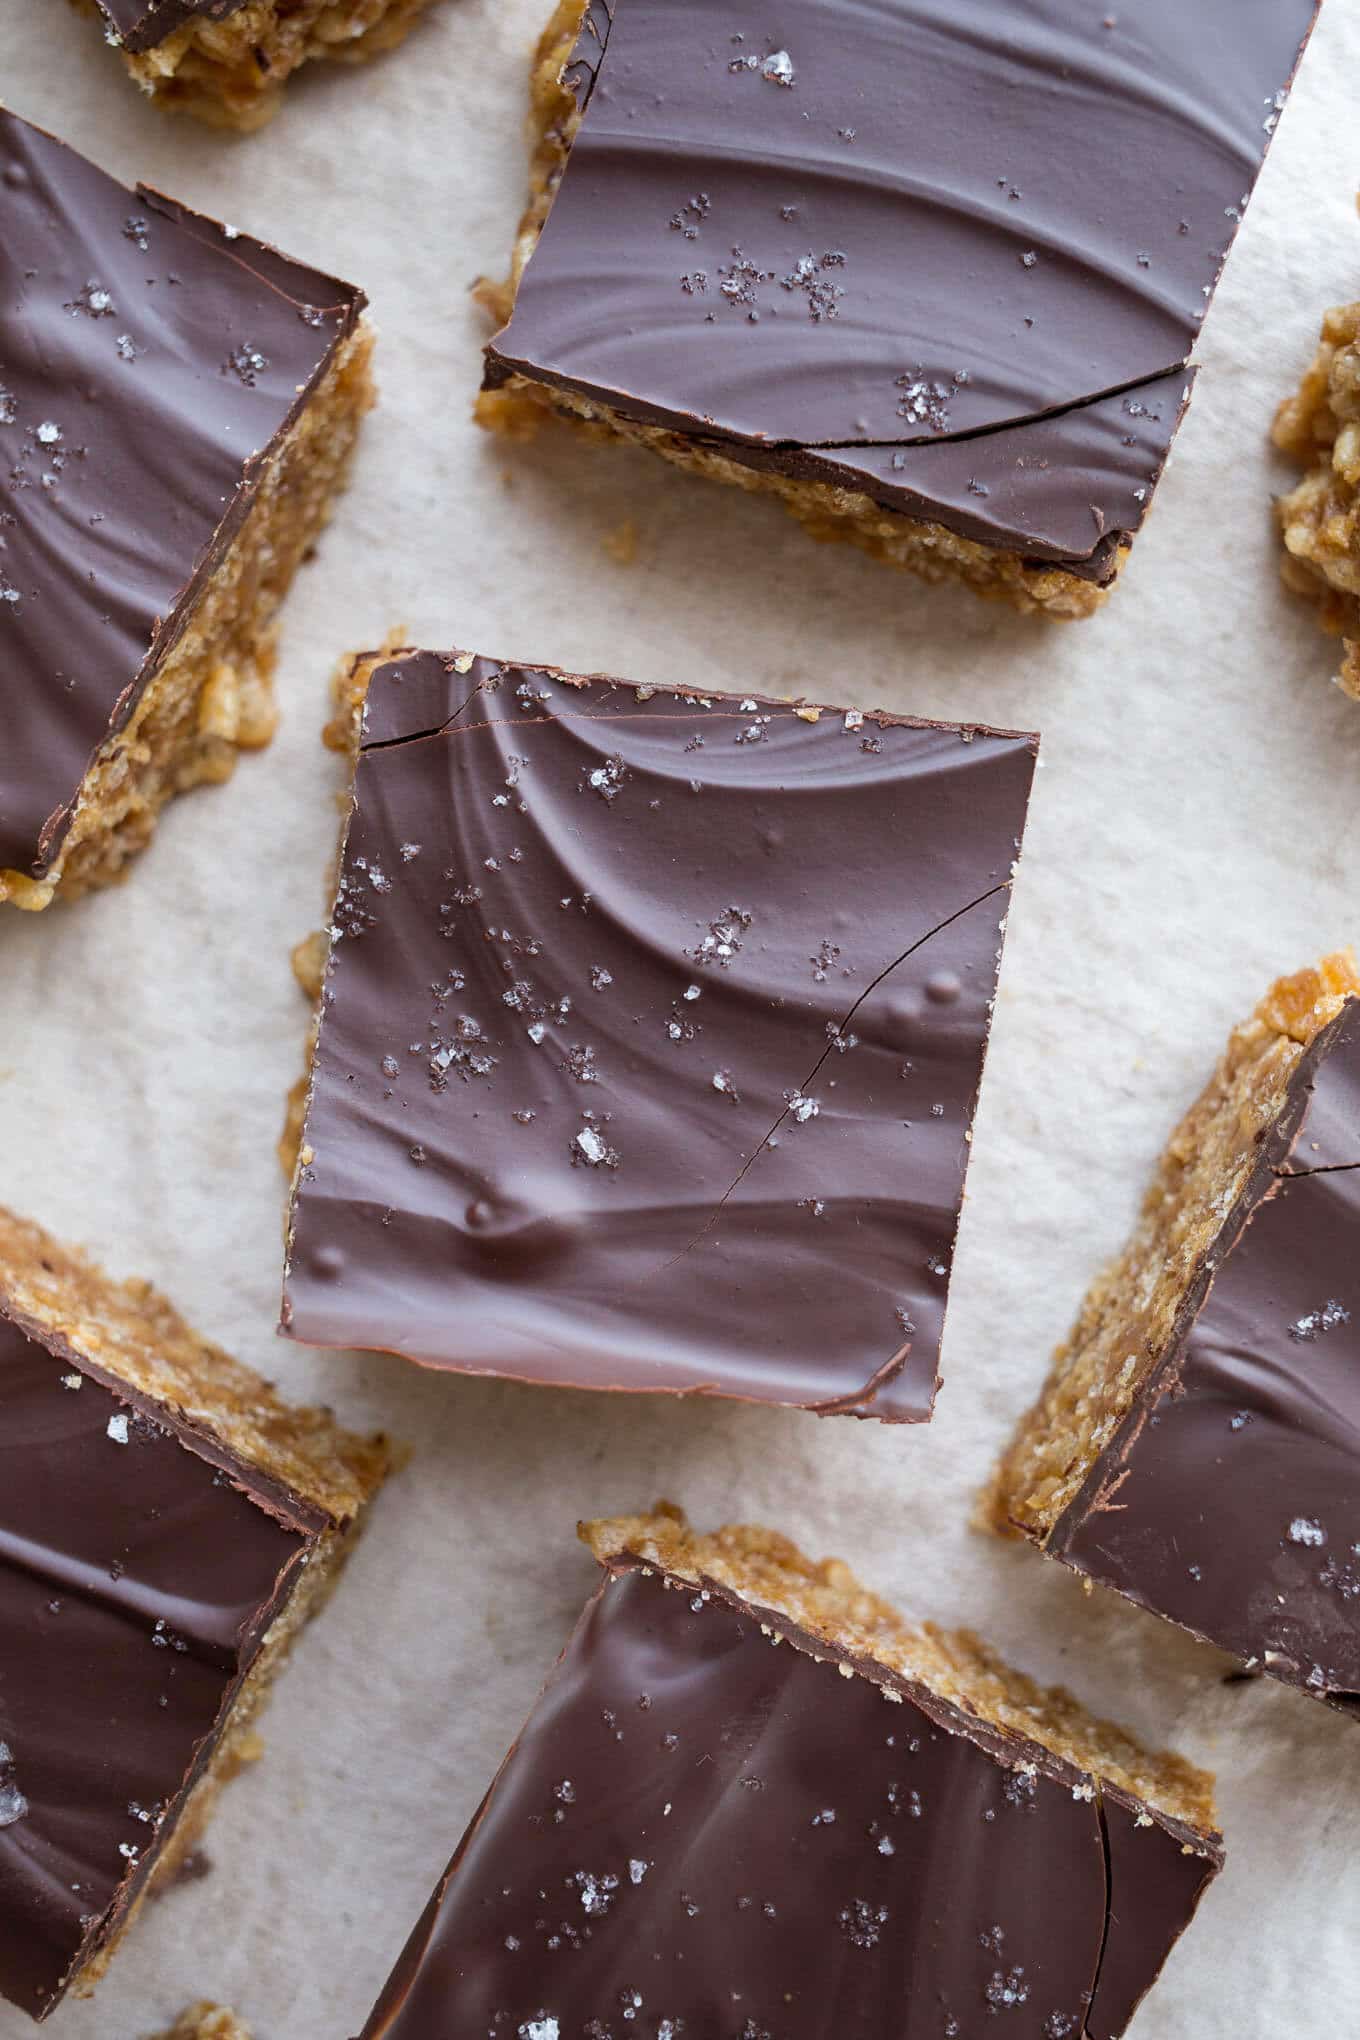 Peanut Butter Maple Scotcheroos are a healthier take on the classic treat. Made with brown rice cereal, peanut butter, maple syrup, and dairy-free chocolate. Gluten-free, vegan, refined sugar-free.